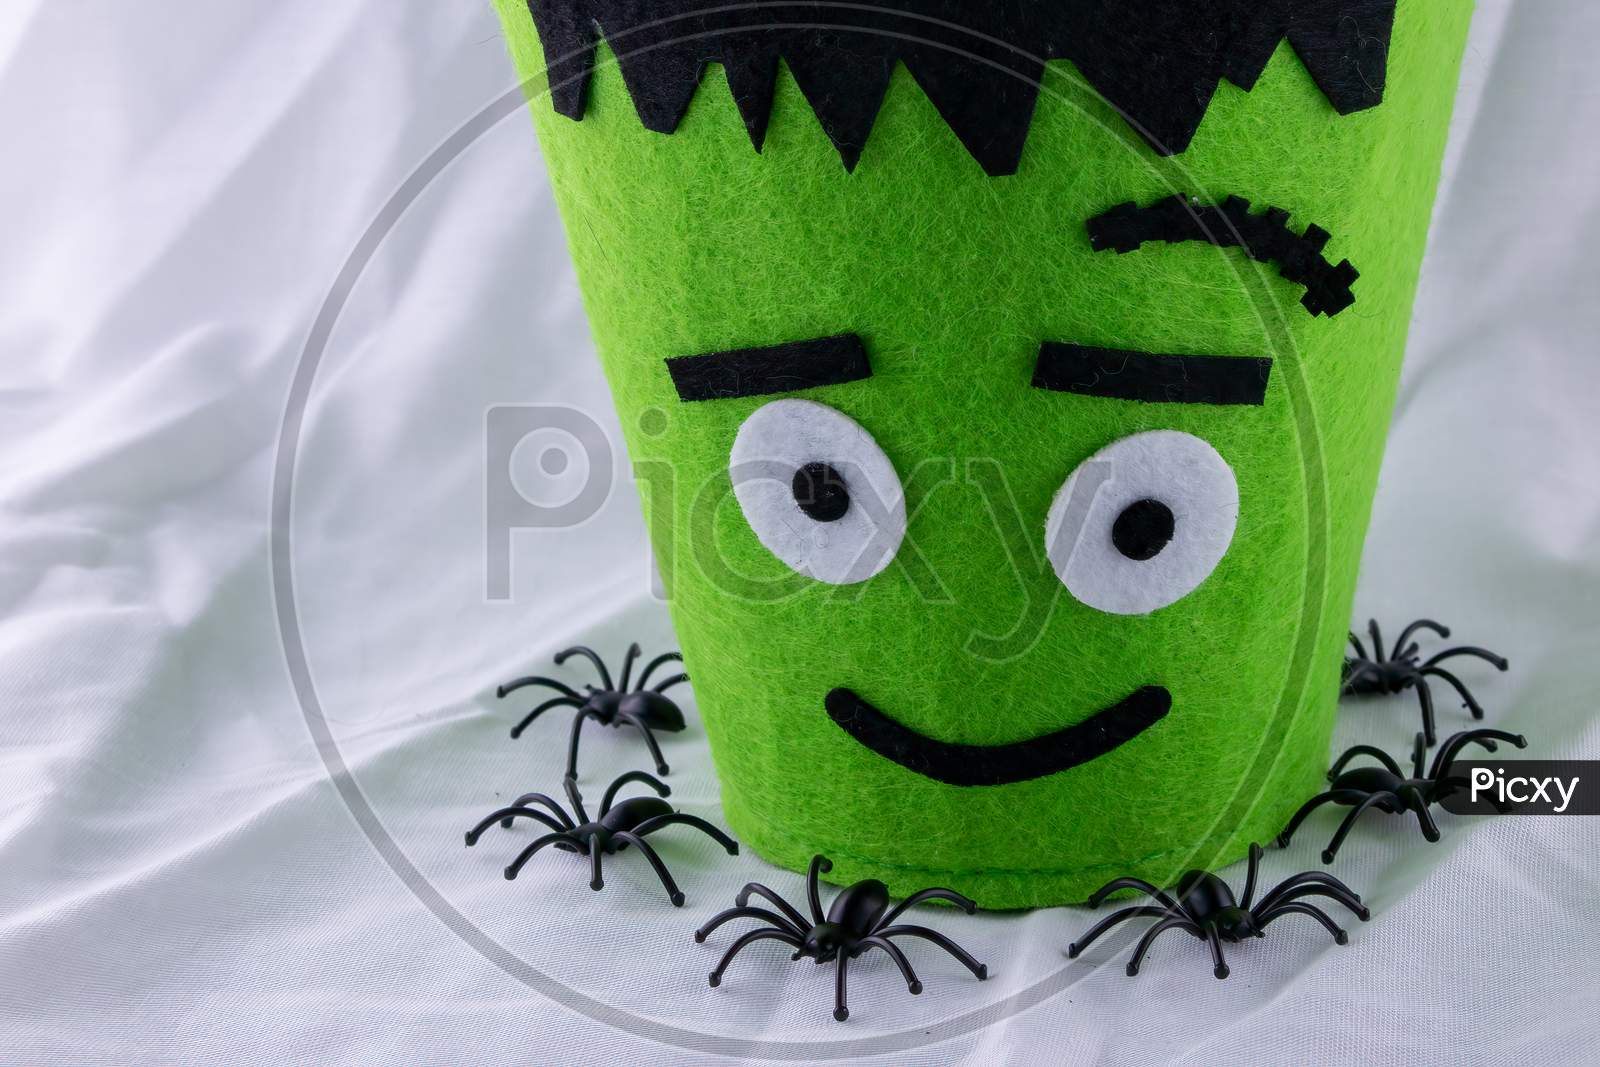 Halloween Fun For Kids Going Out To Trick Or Treat. Green Monster Candy Bags In A Nest Of Black Plastic Spiders